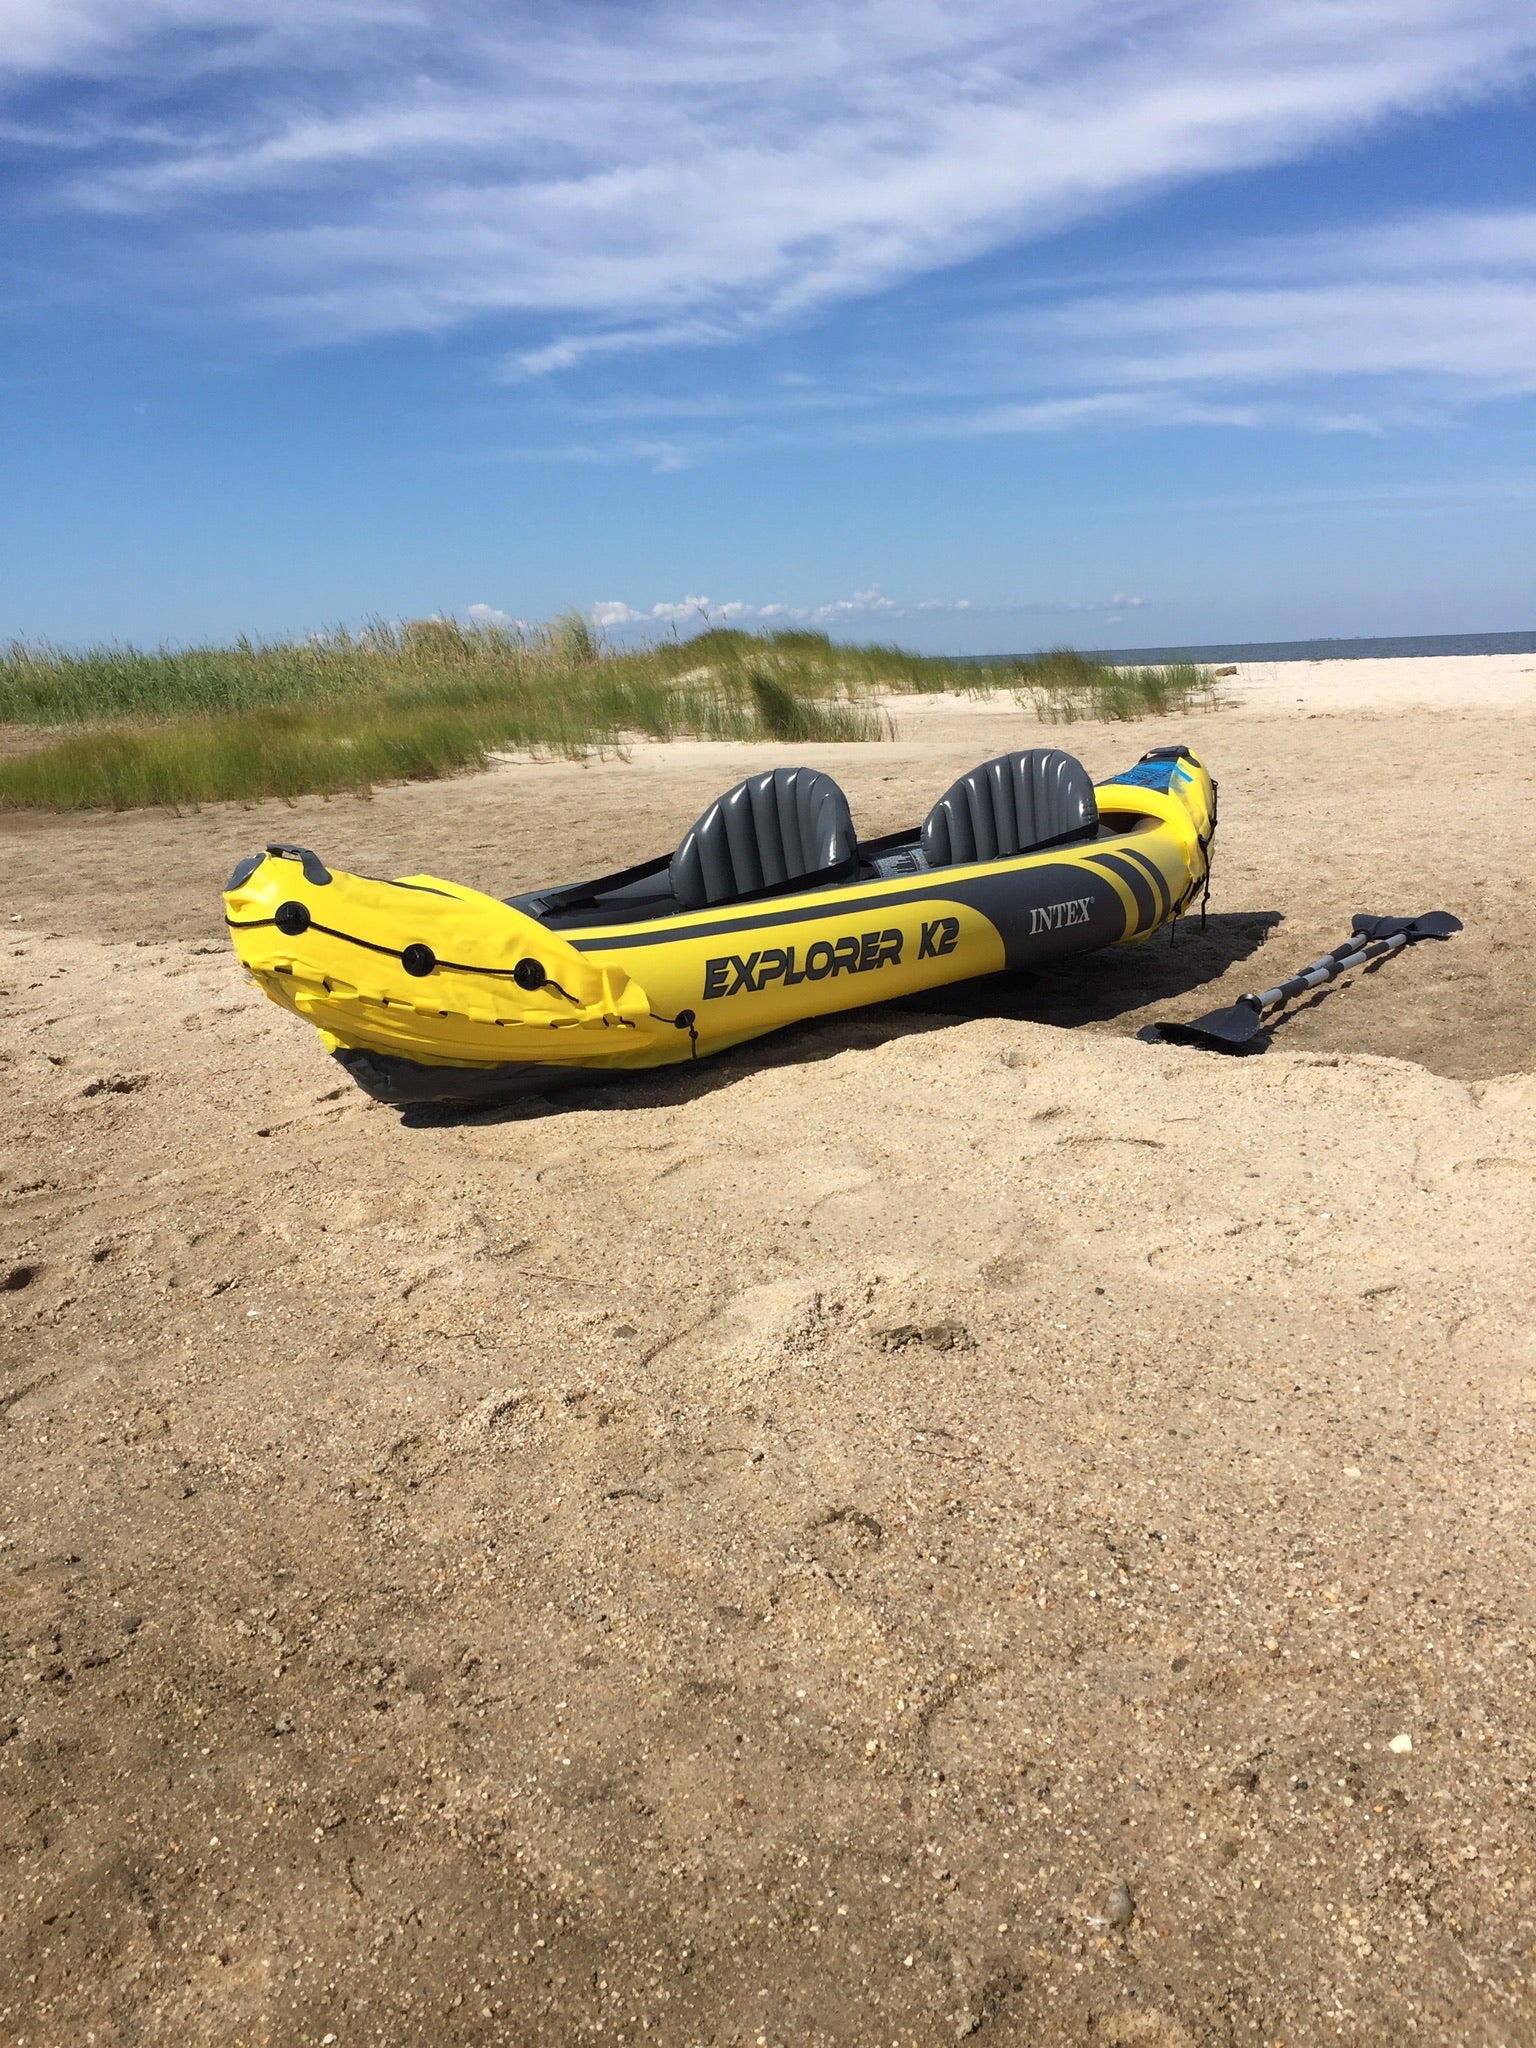 The inflatable kayak we used to paddle to the island